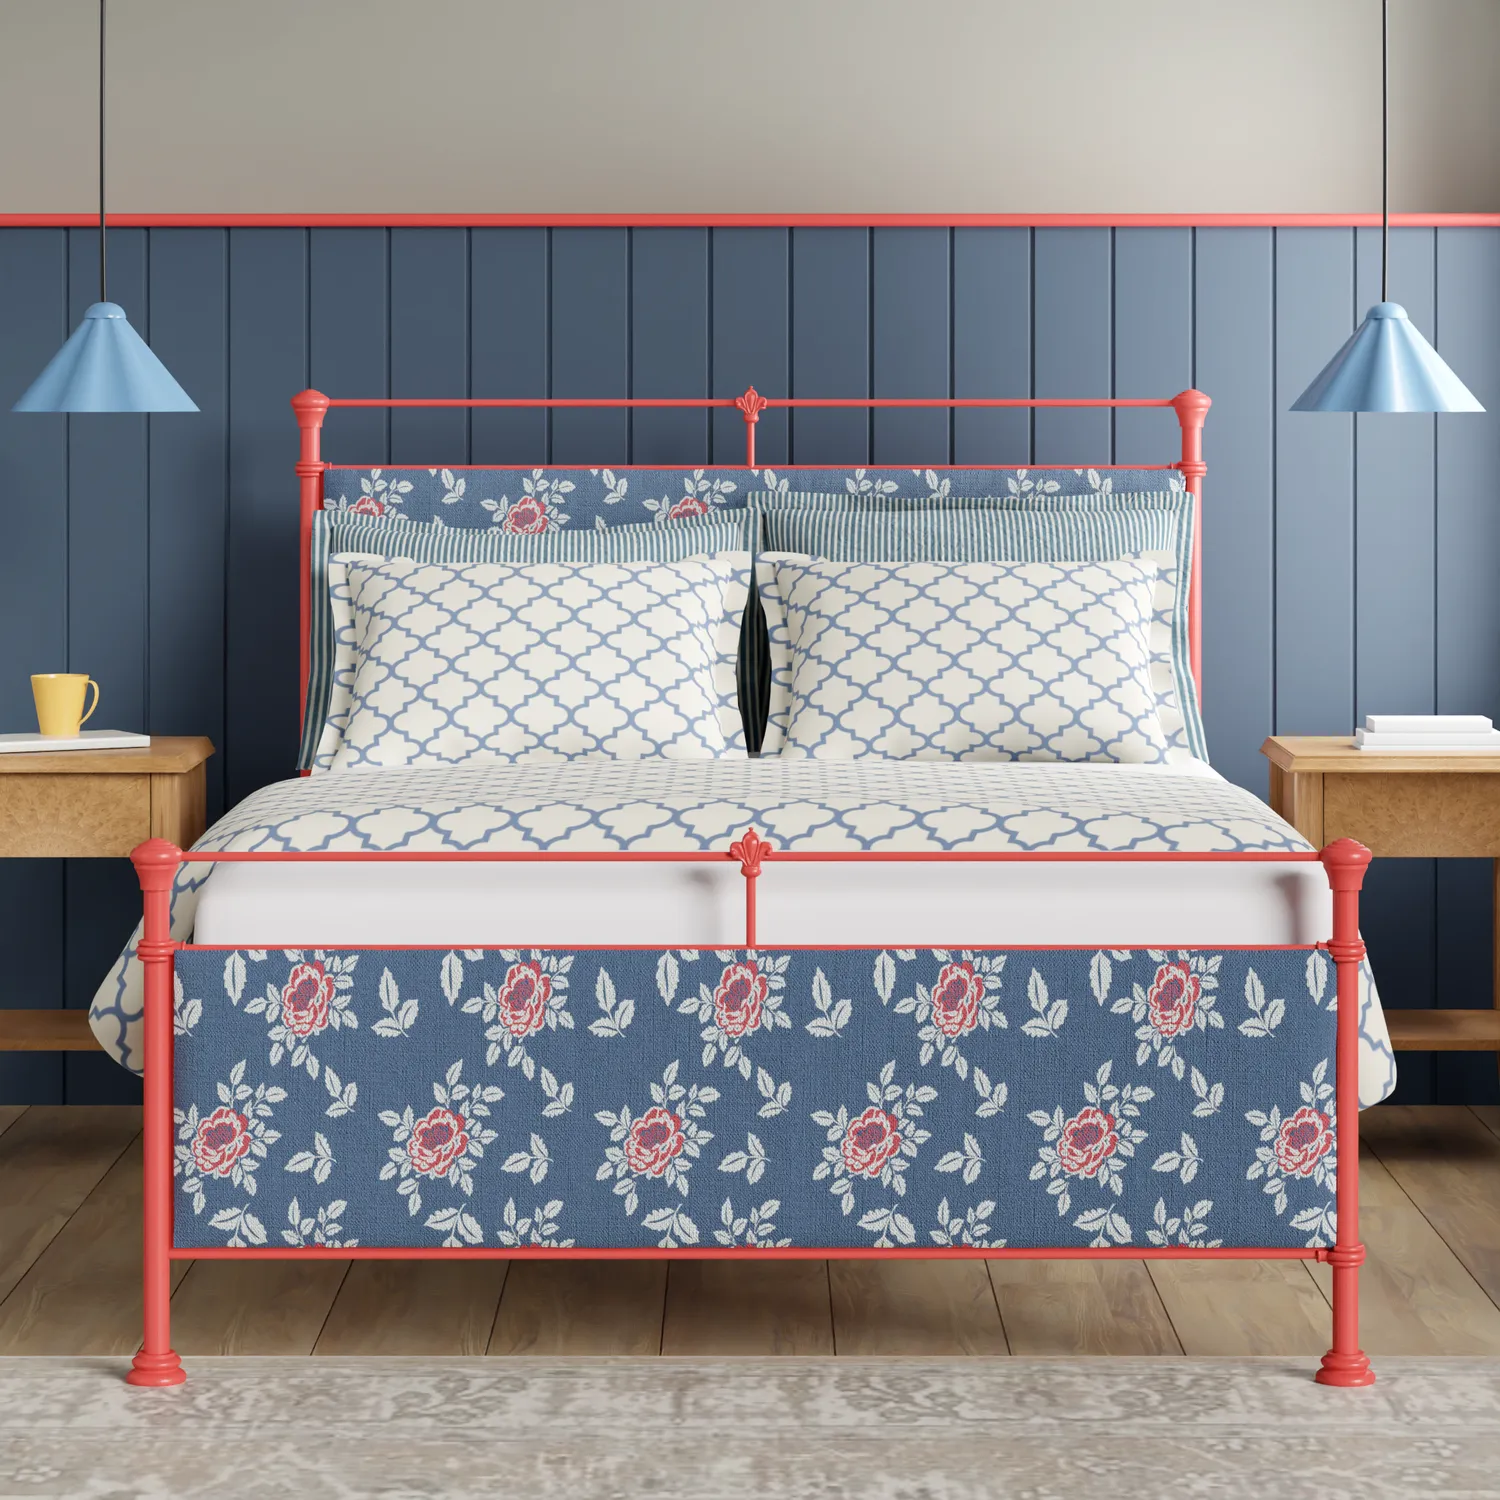 Nancy iron bed - Image bold and bright bedroom